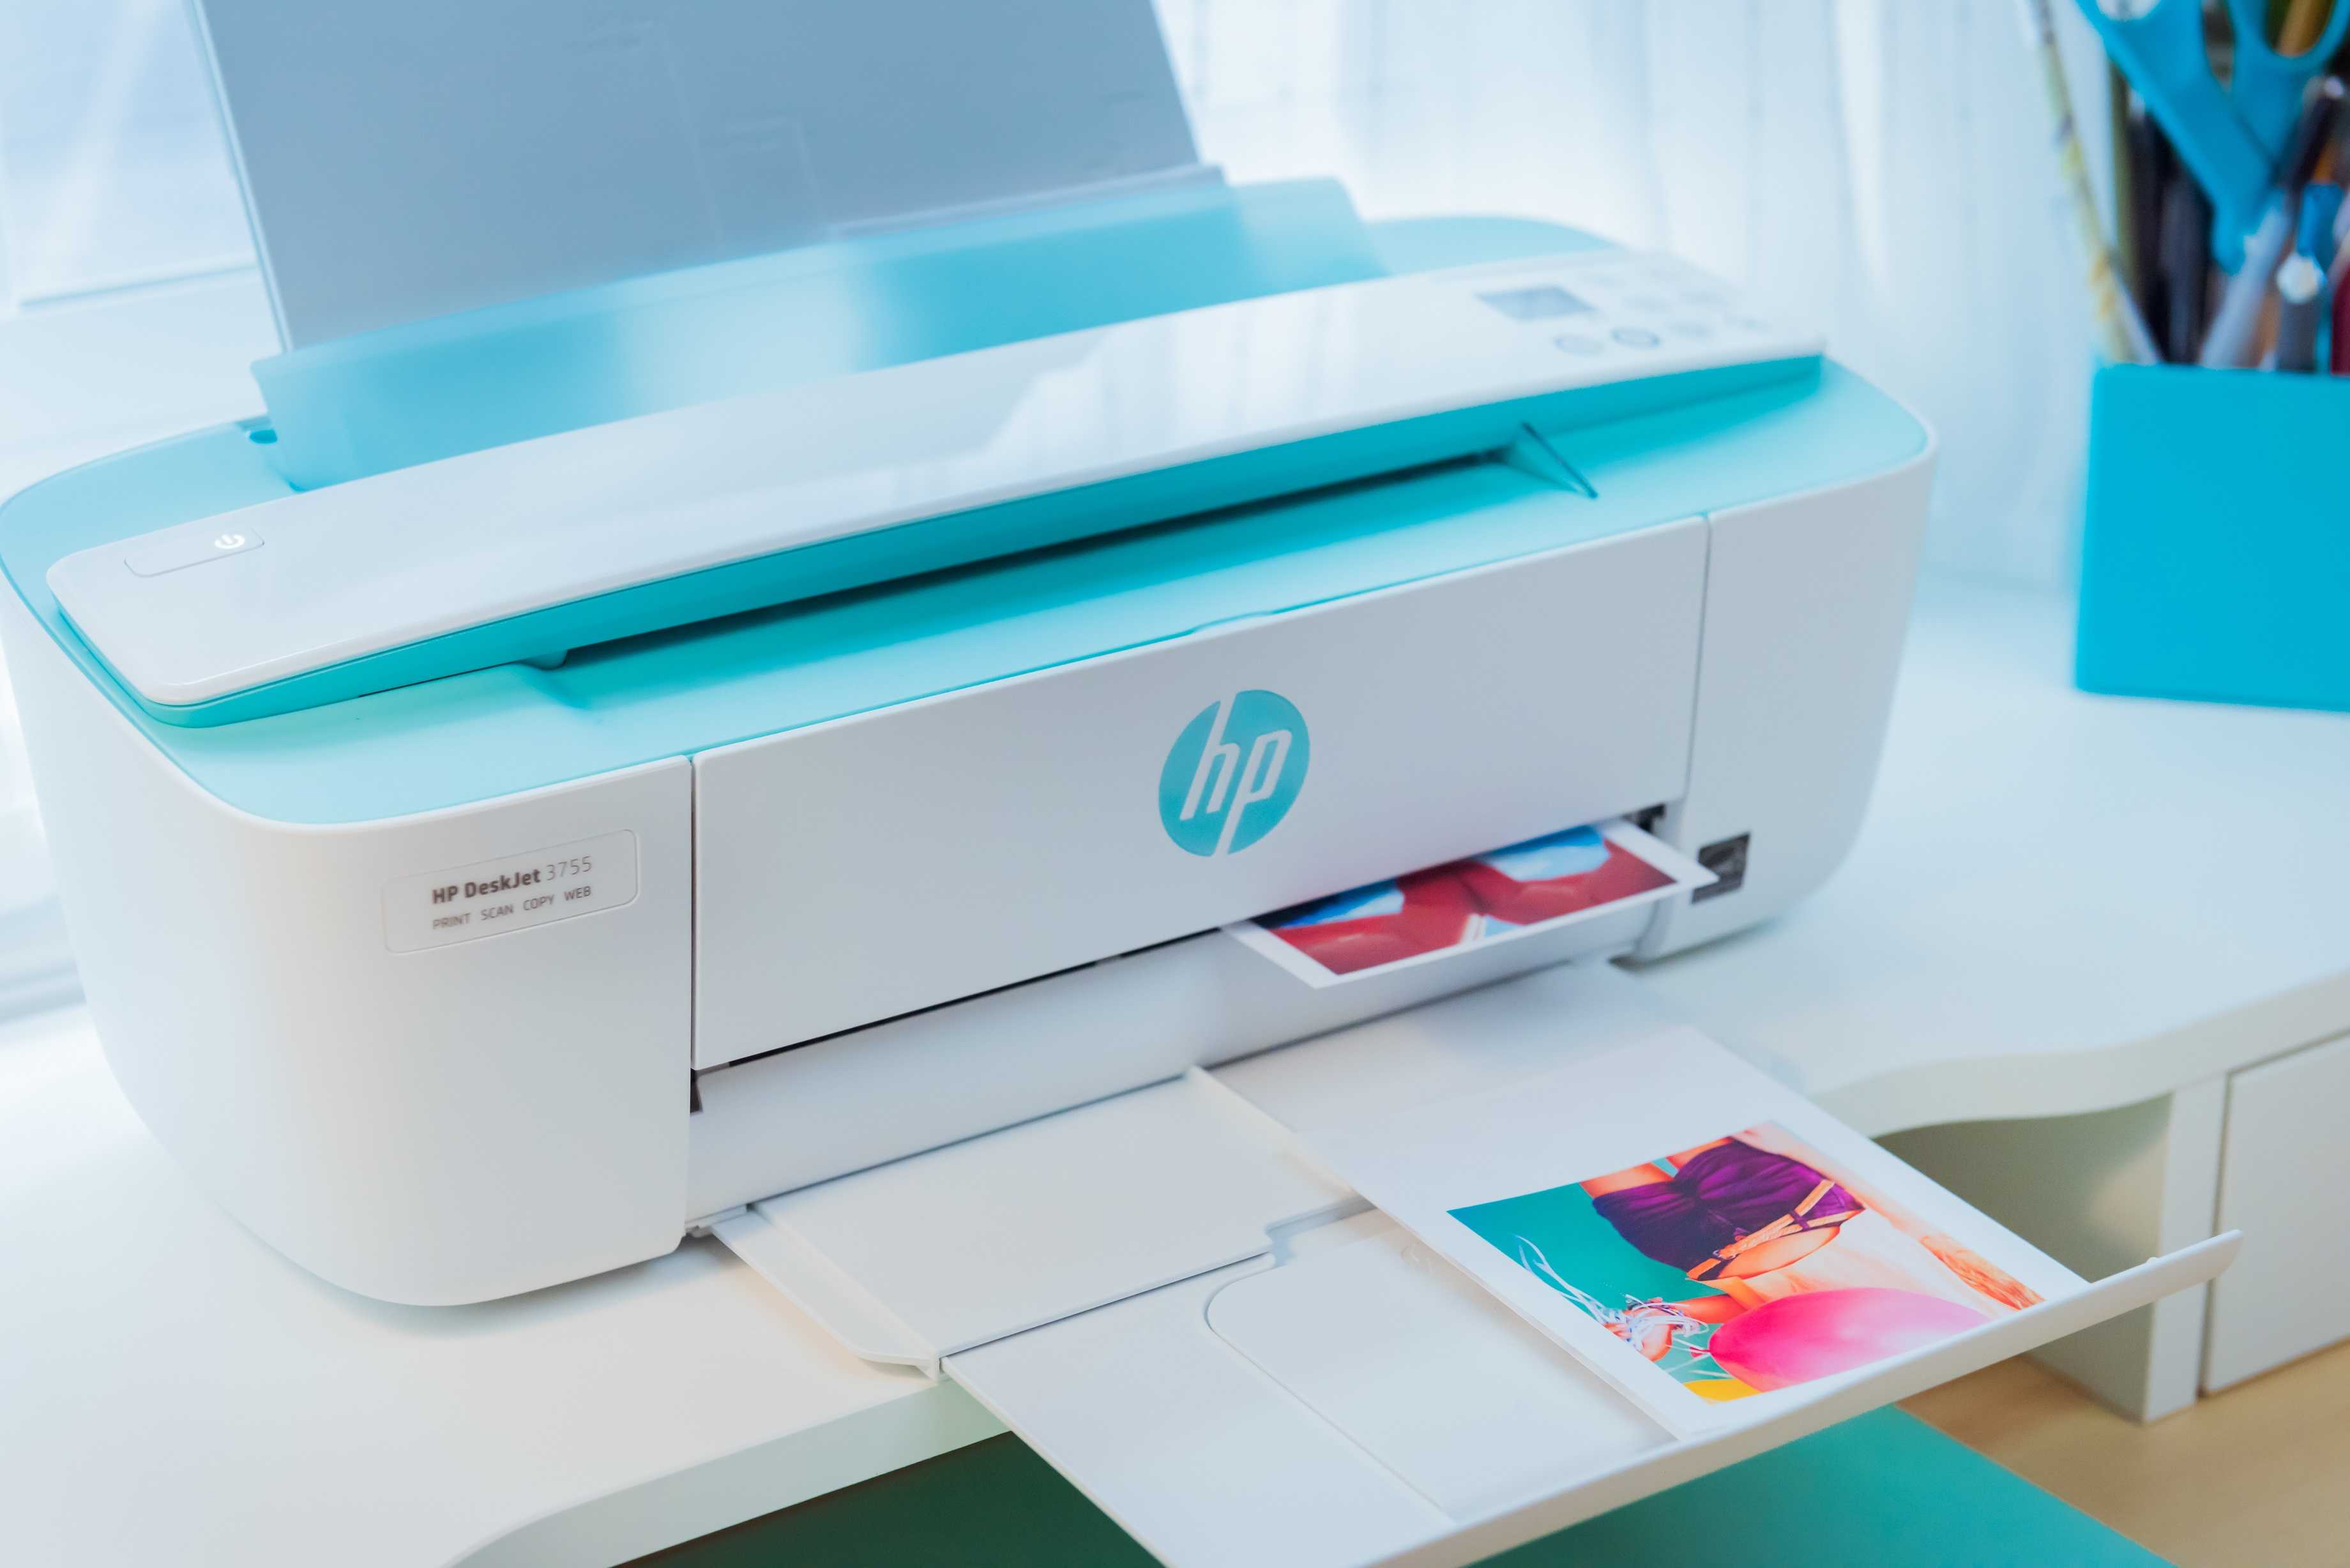 vamers-fyi-gadgetology-hp-announces-worlds-smallers-all-in-one-printer-01